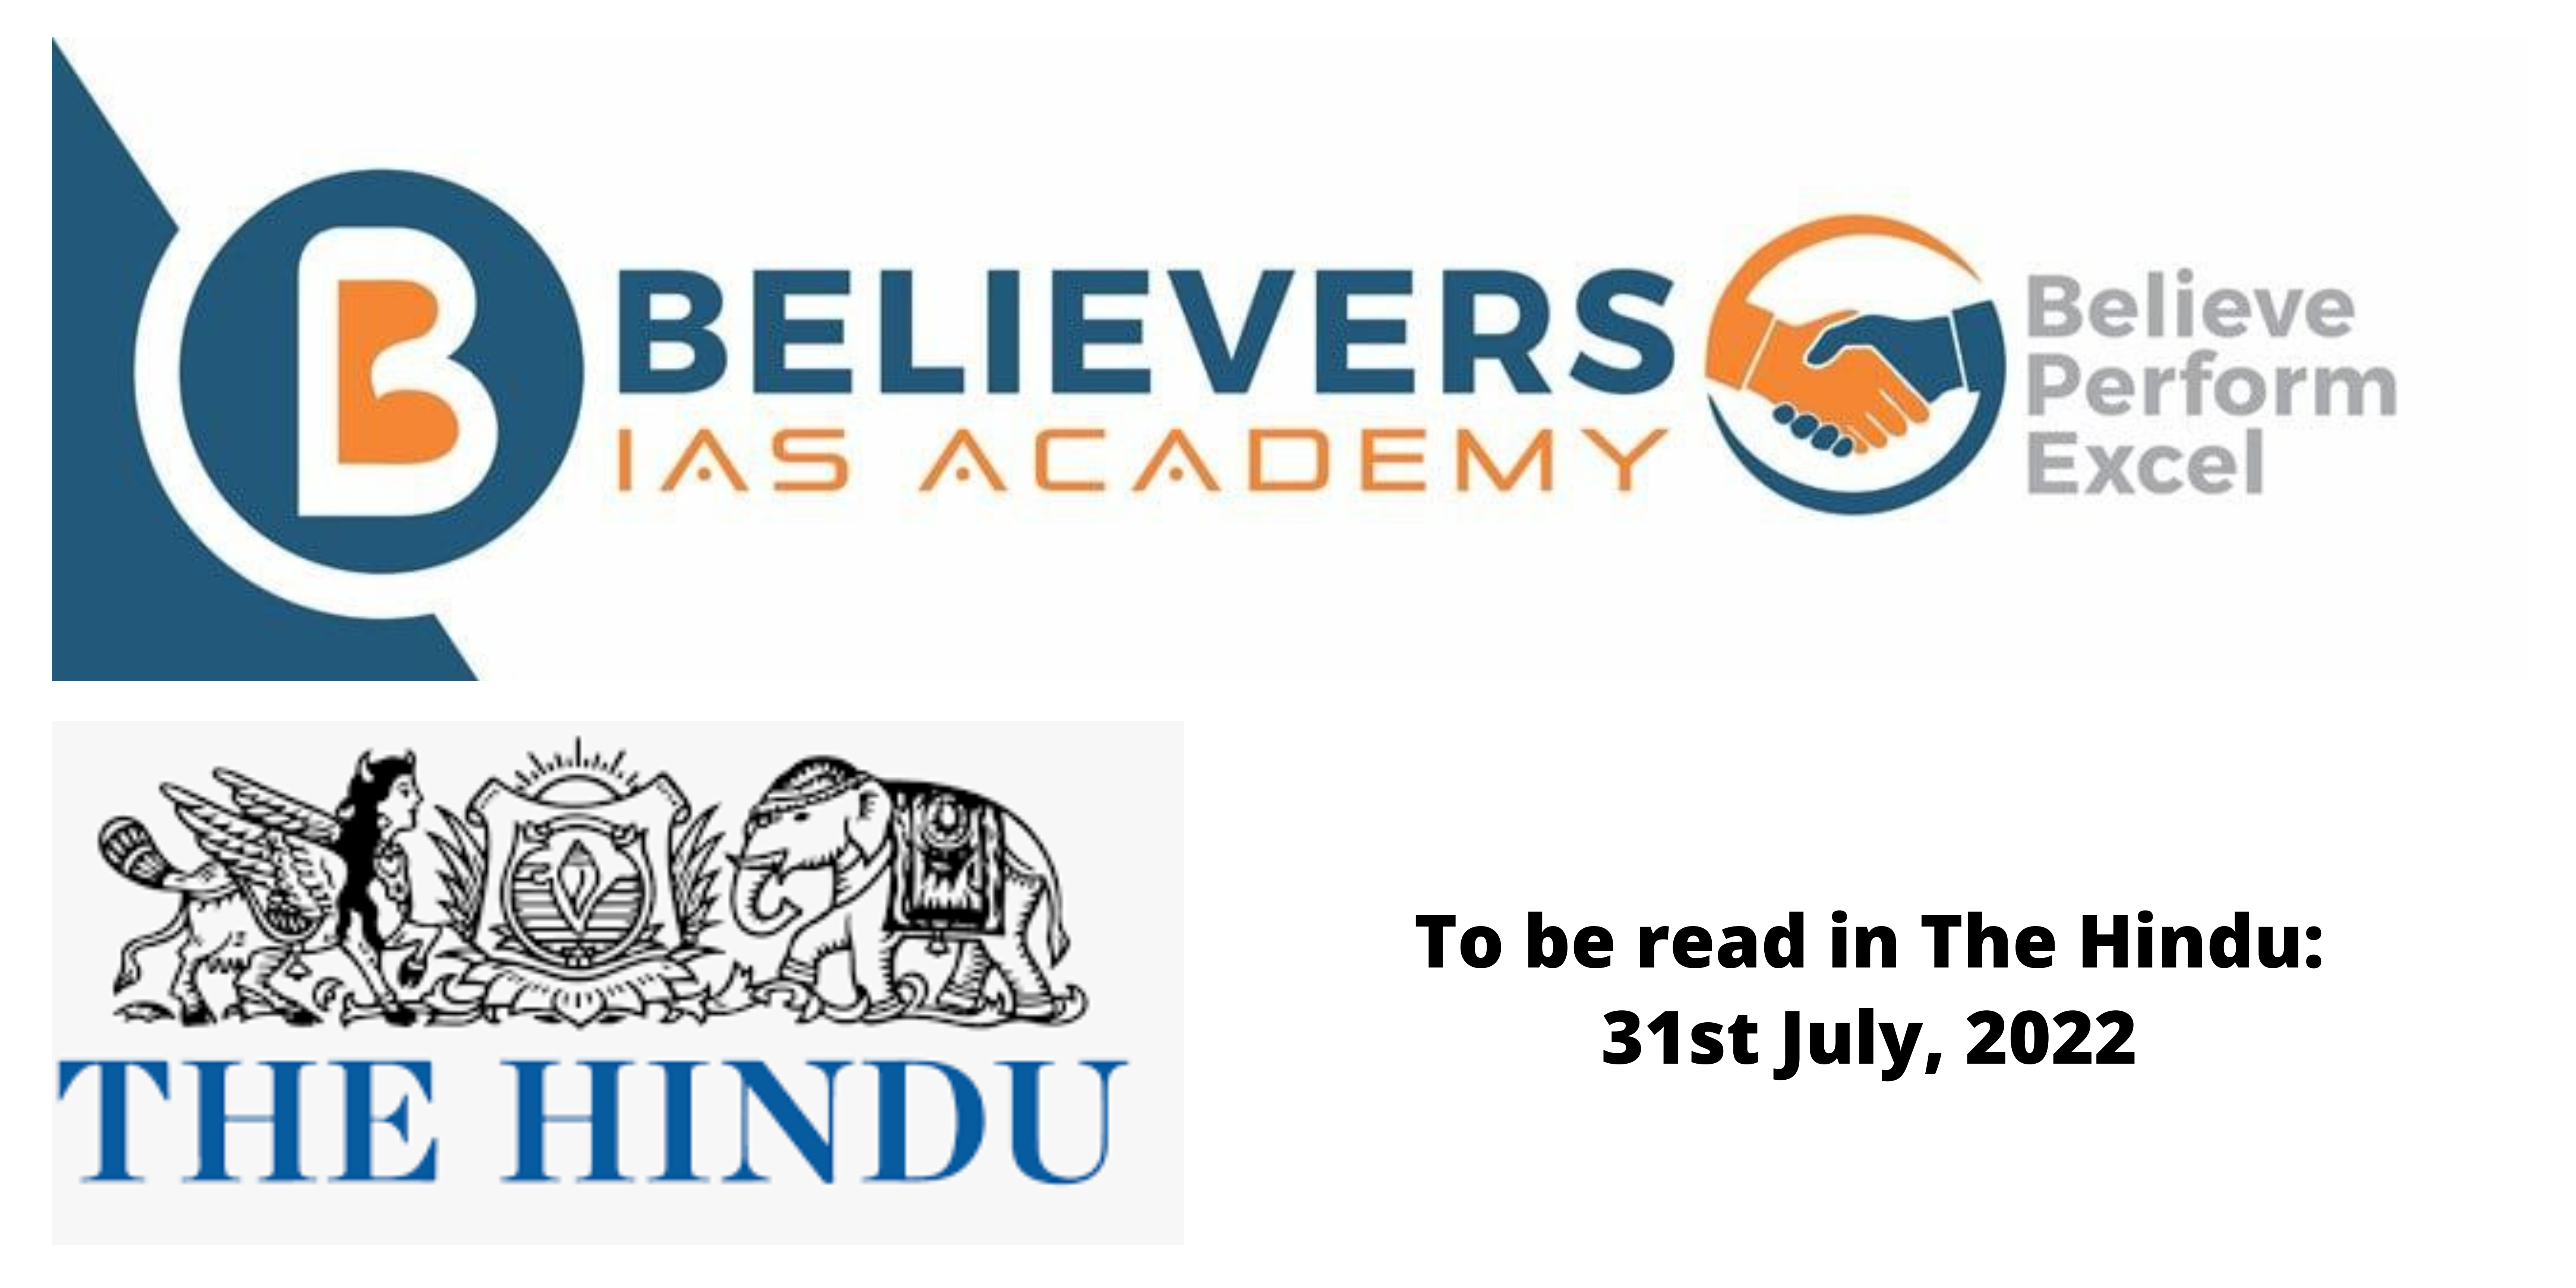 News articles for Civil Services Exam preparation 31st July, 2022